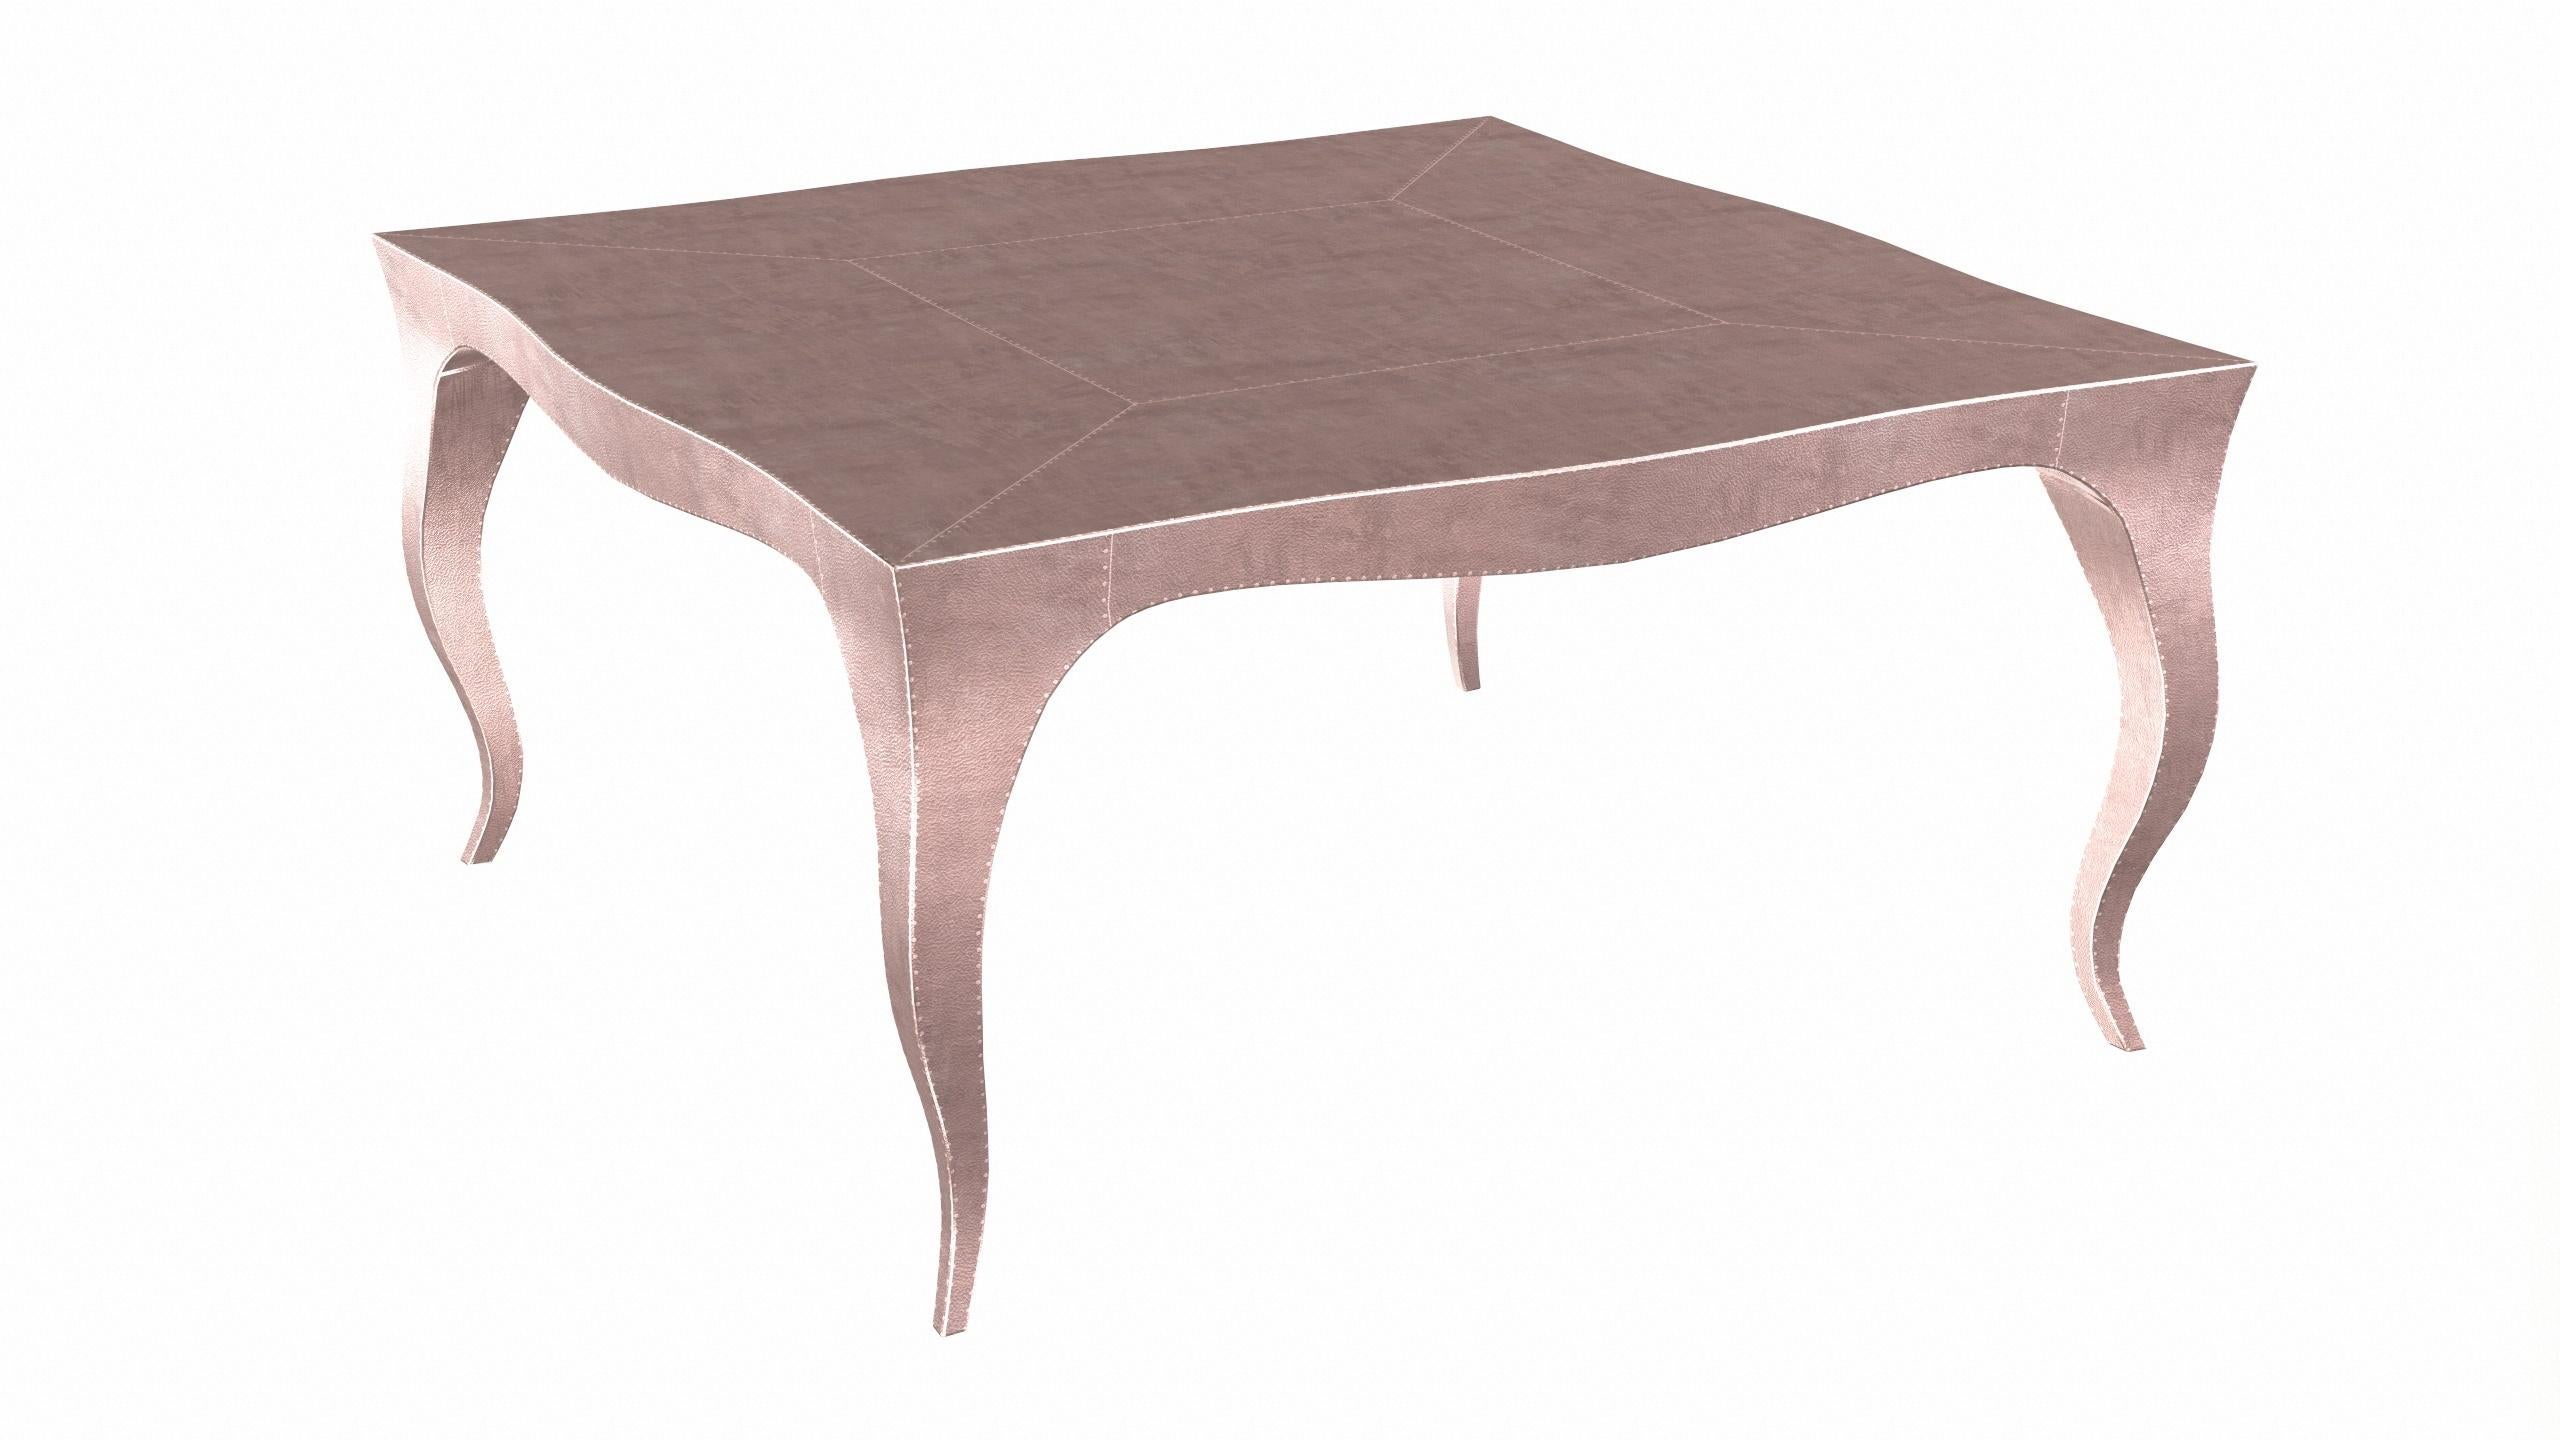 Other Louise Art Deco Center Tables Fine Hammered Copper by Paul Mathieu for S.Odegard For Sale